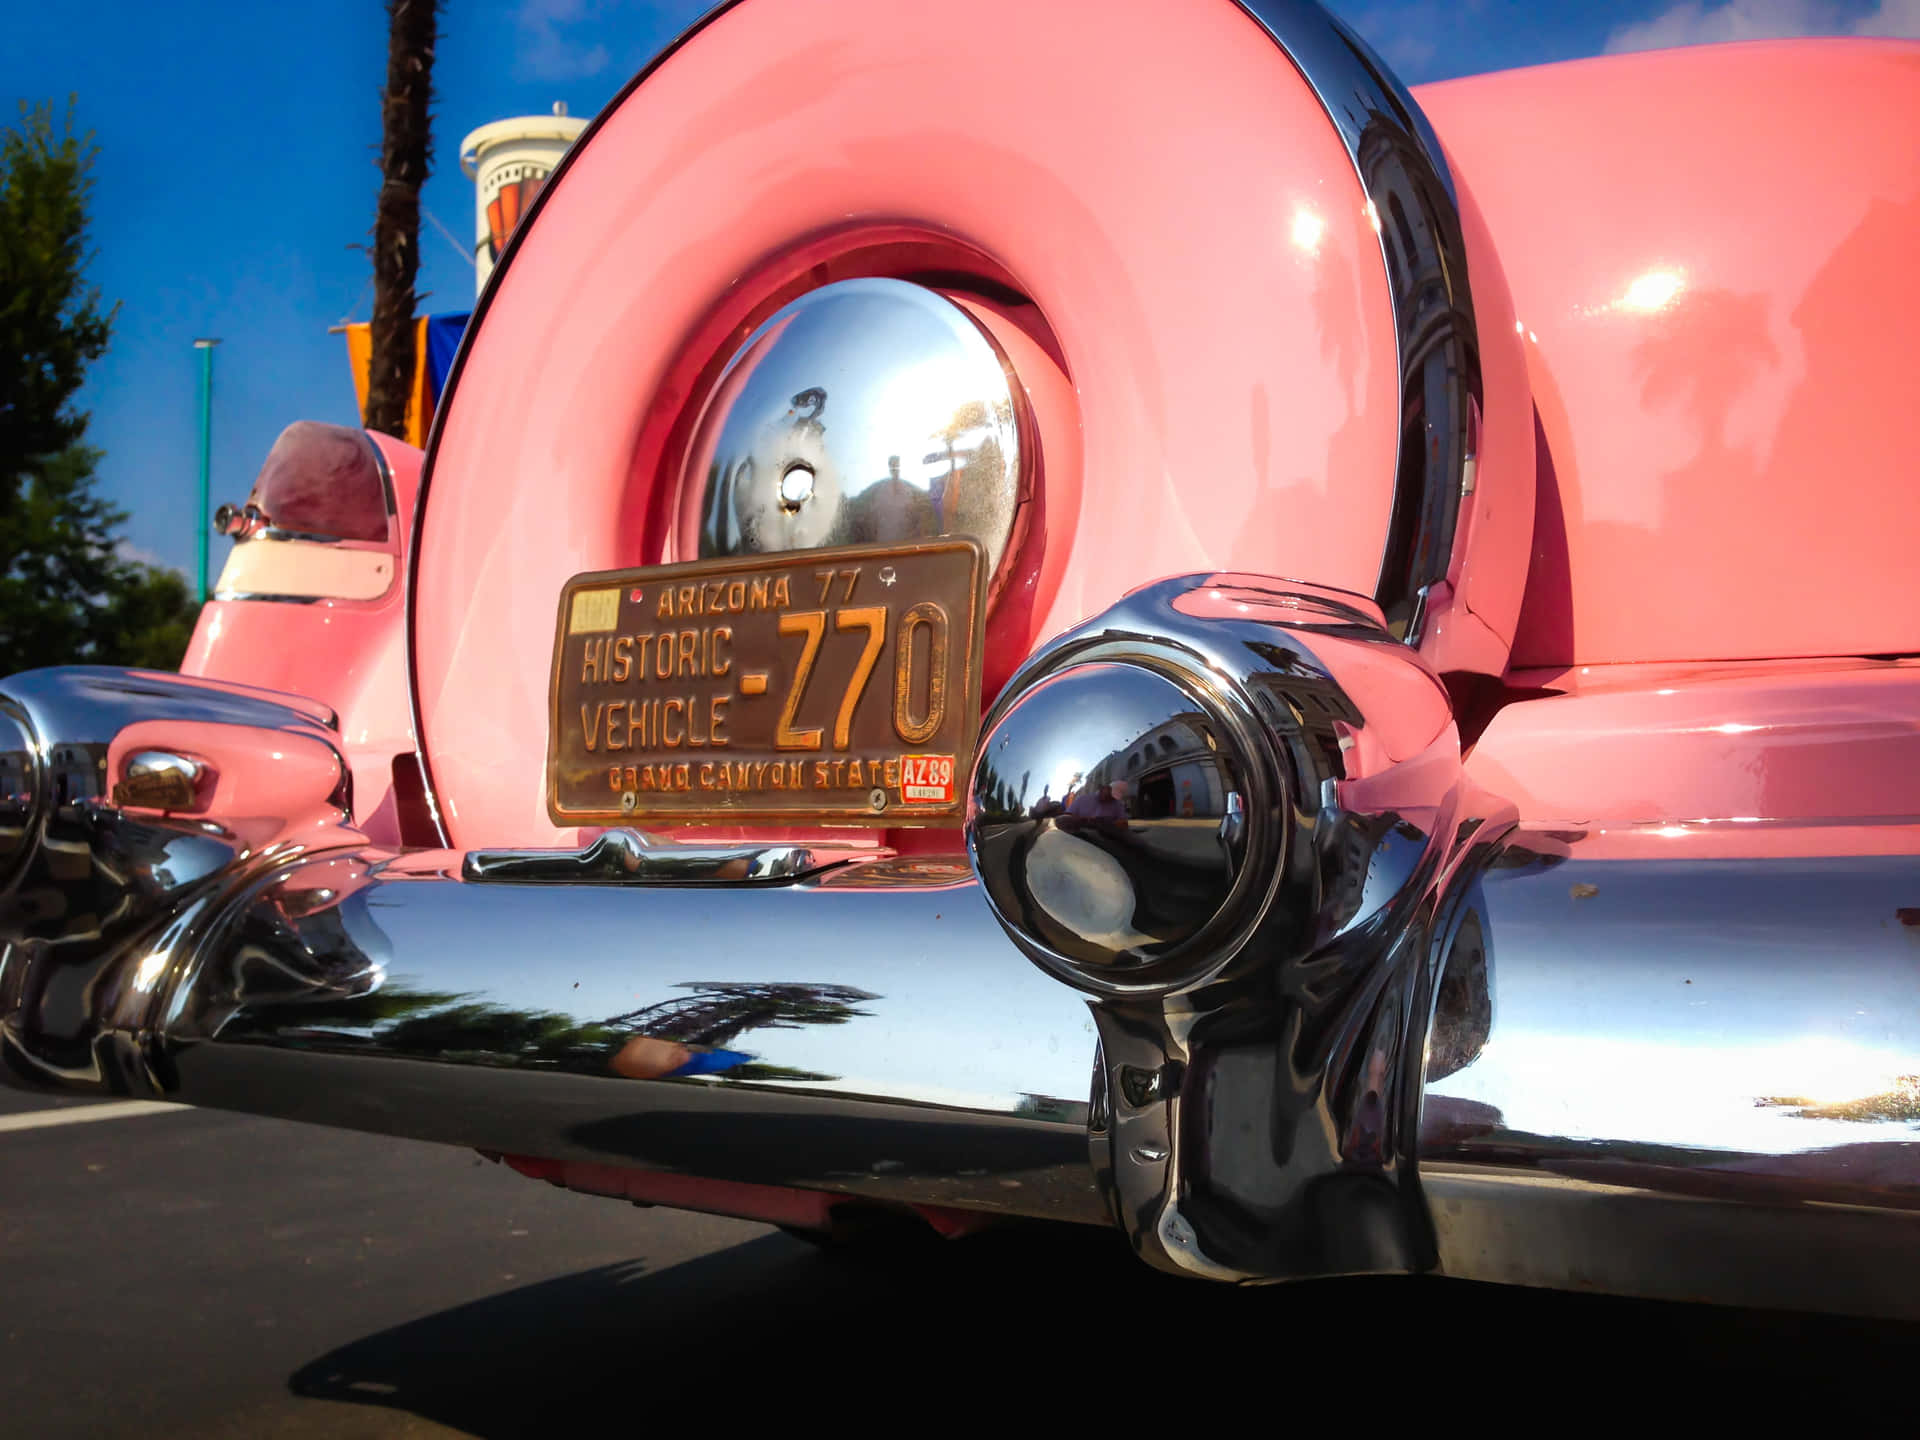 Admiring the beauty of a pink vintage car Wallpaper